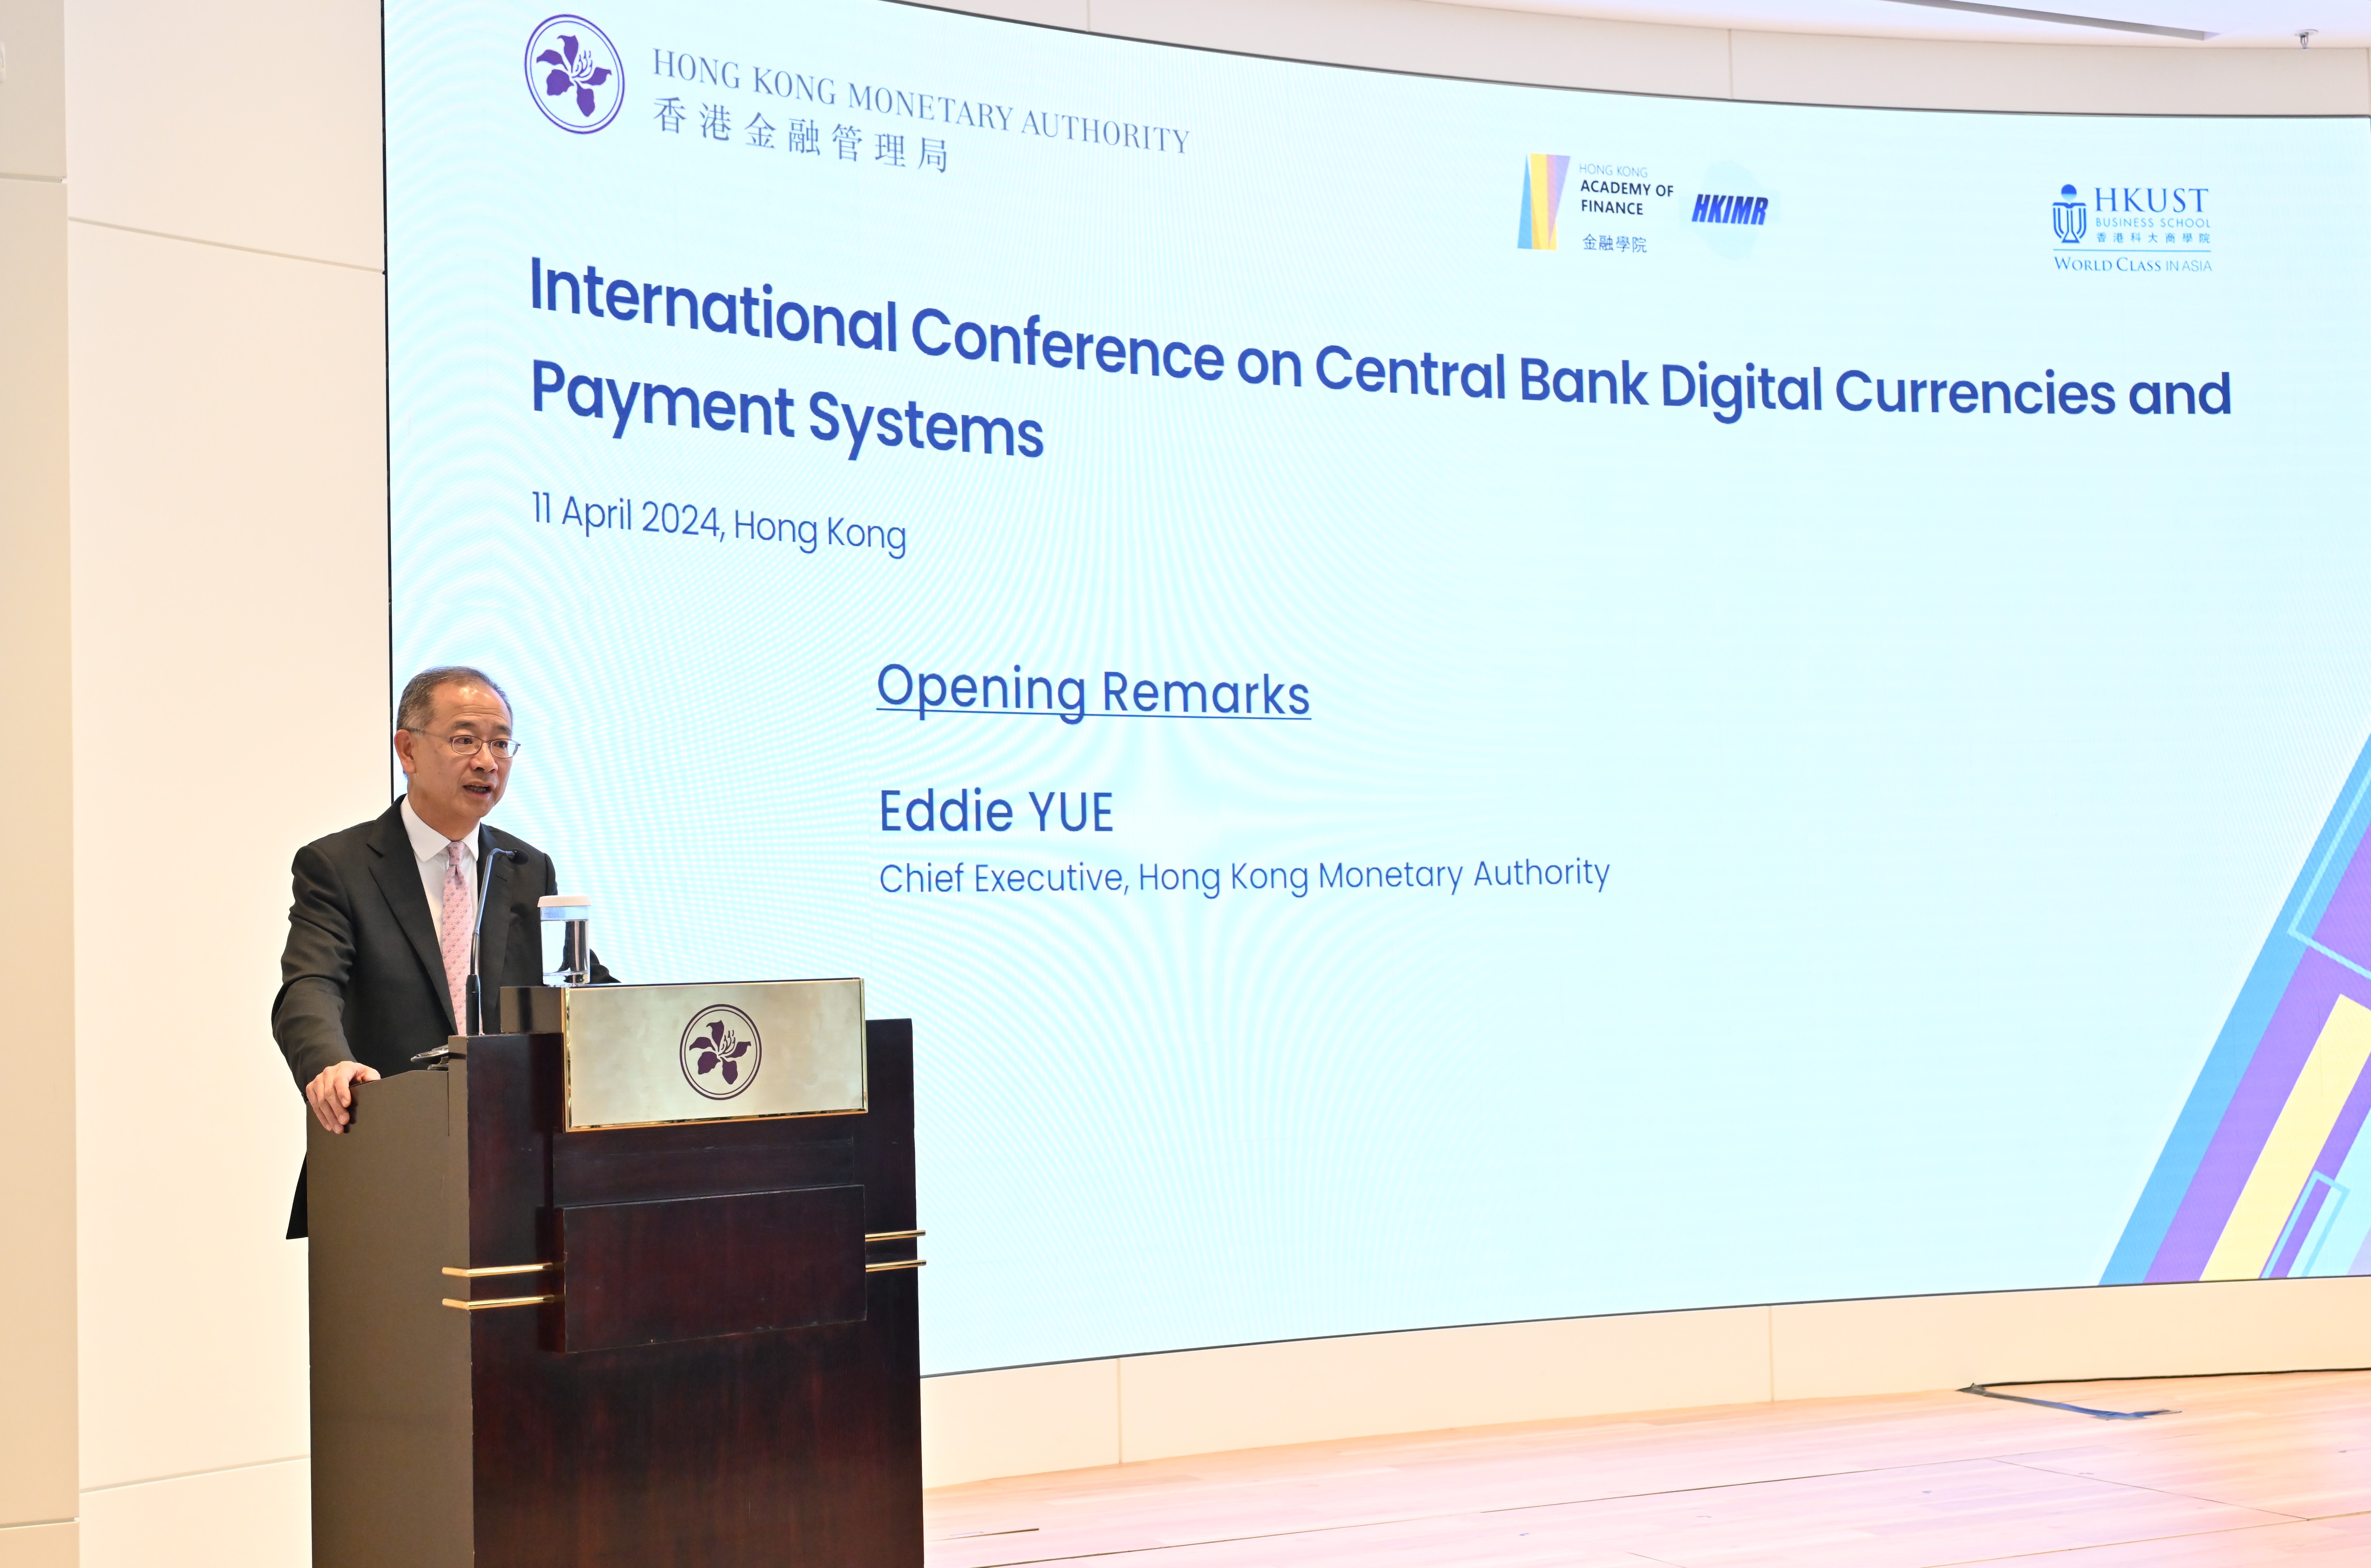 The conference commences with a keynote speech by Mr. Eddie Yue, Chief Executive of HKMA. The event brought together experts from international financial institutions, central banks, and universities across Asia, Europe and North America.